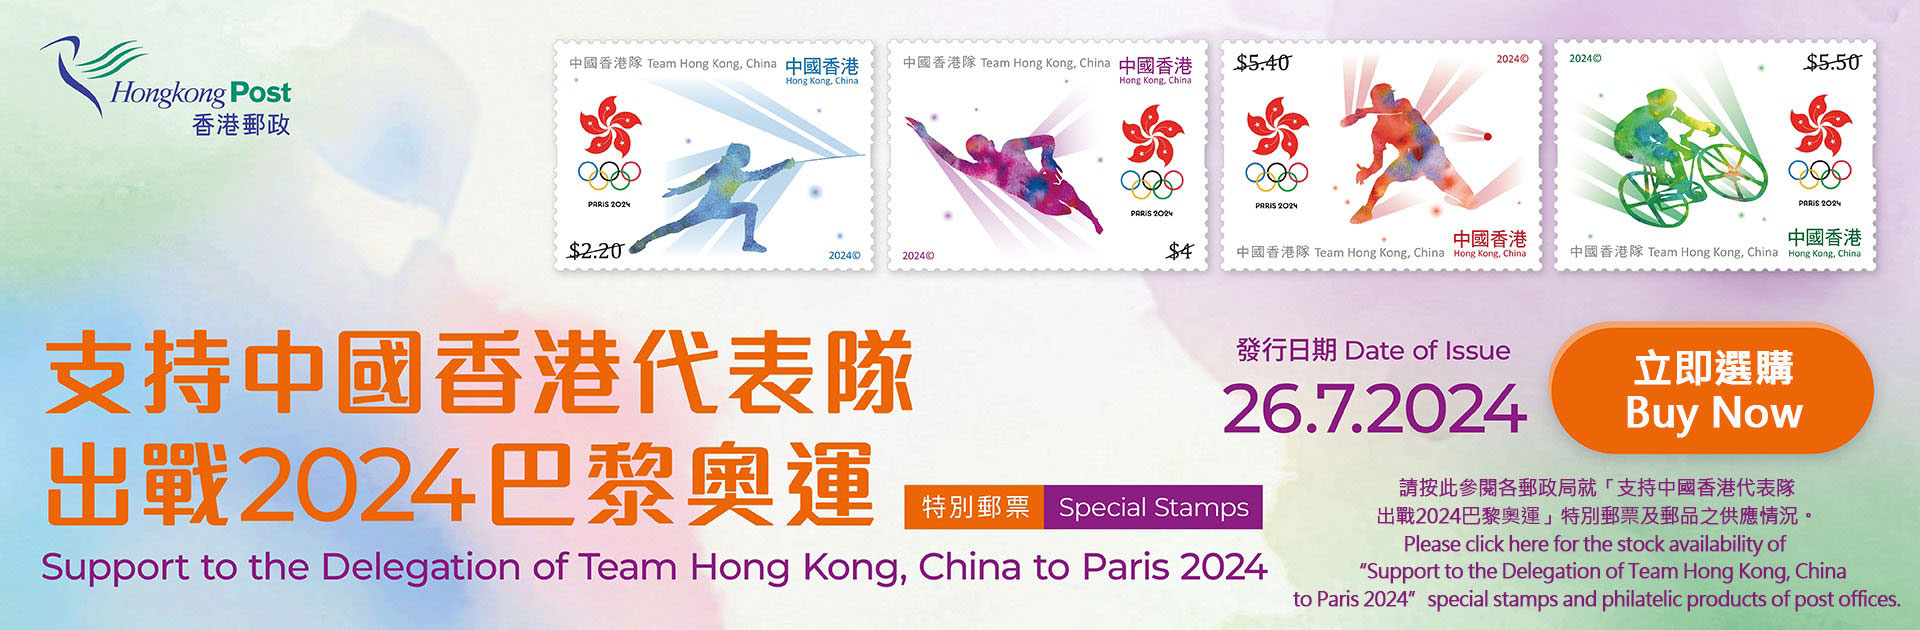 Stock Availability of "Support to the Delegation of Team Hong Kong, China to Paris 2024" Special Stamps 